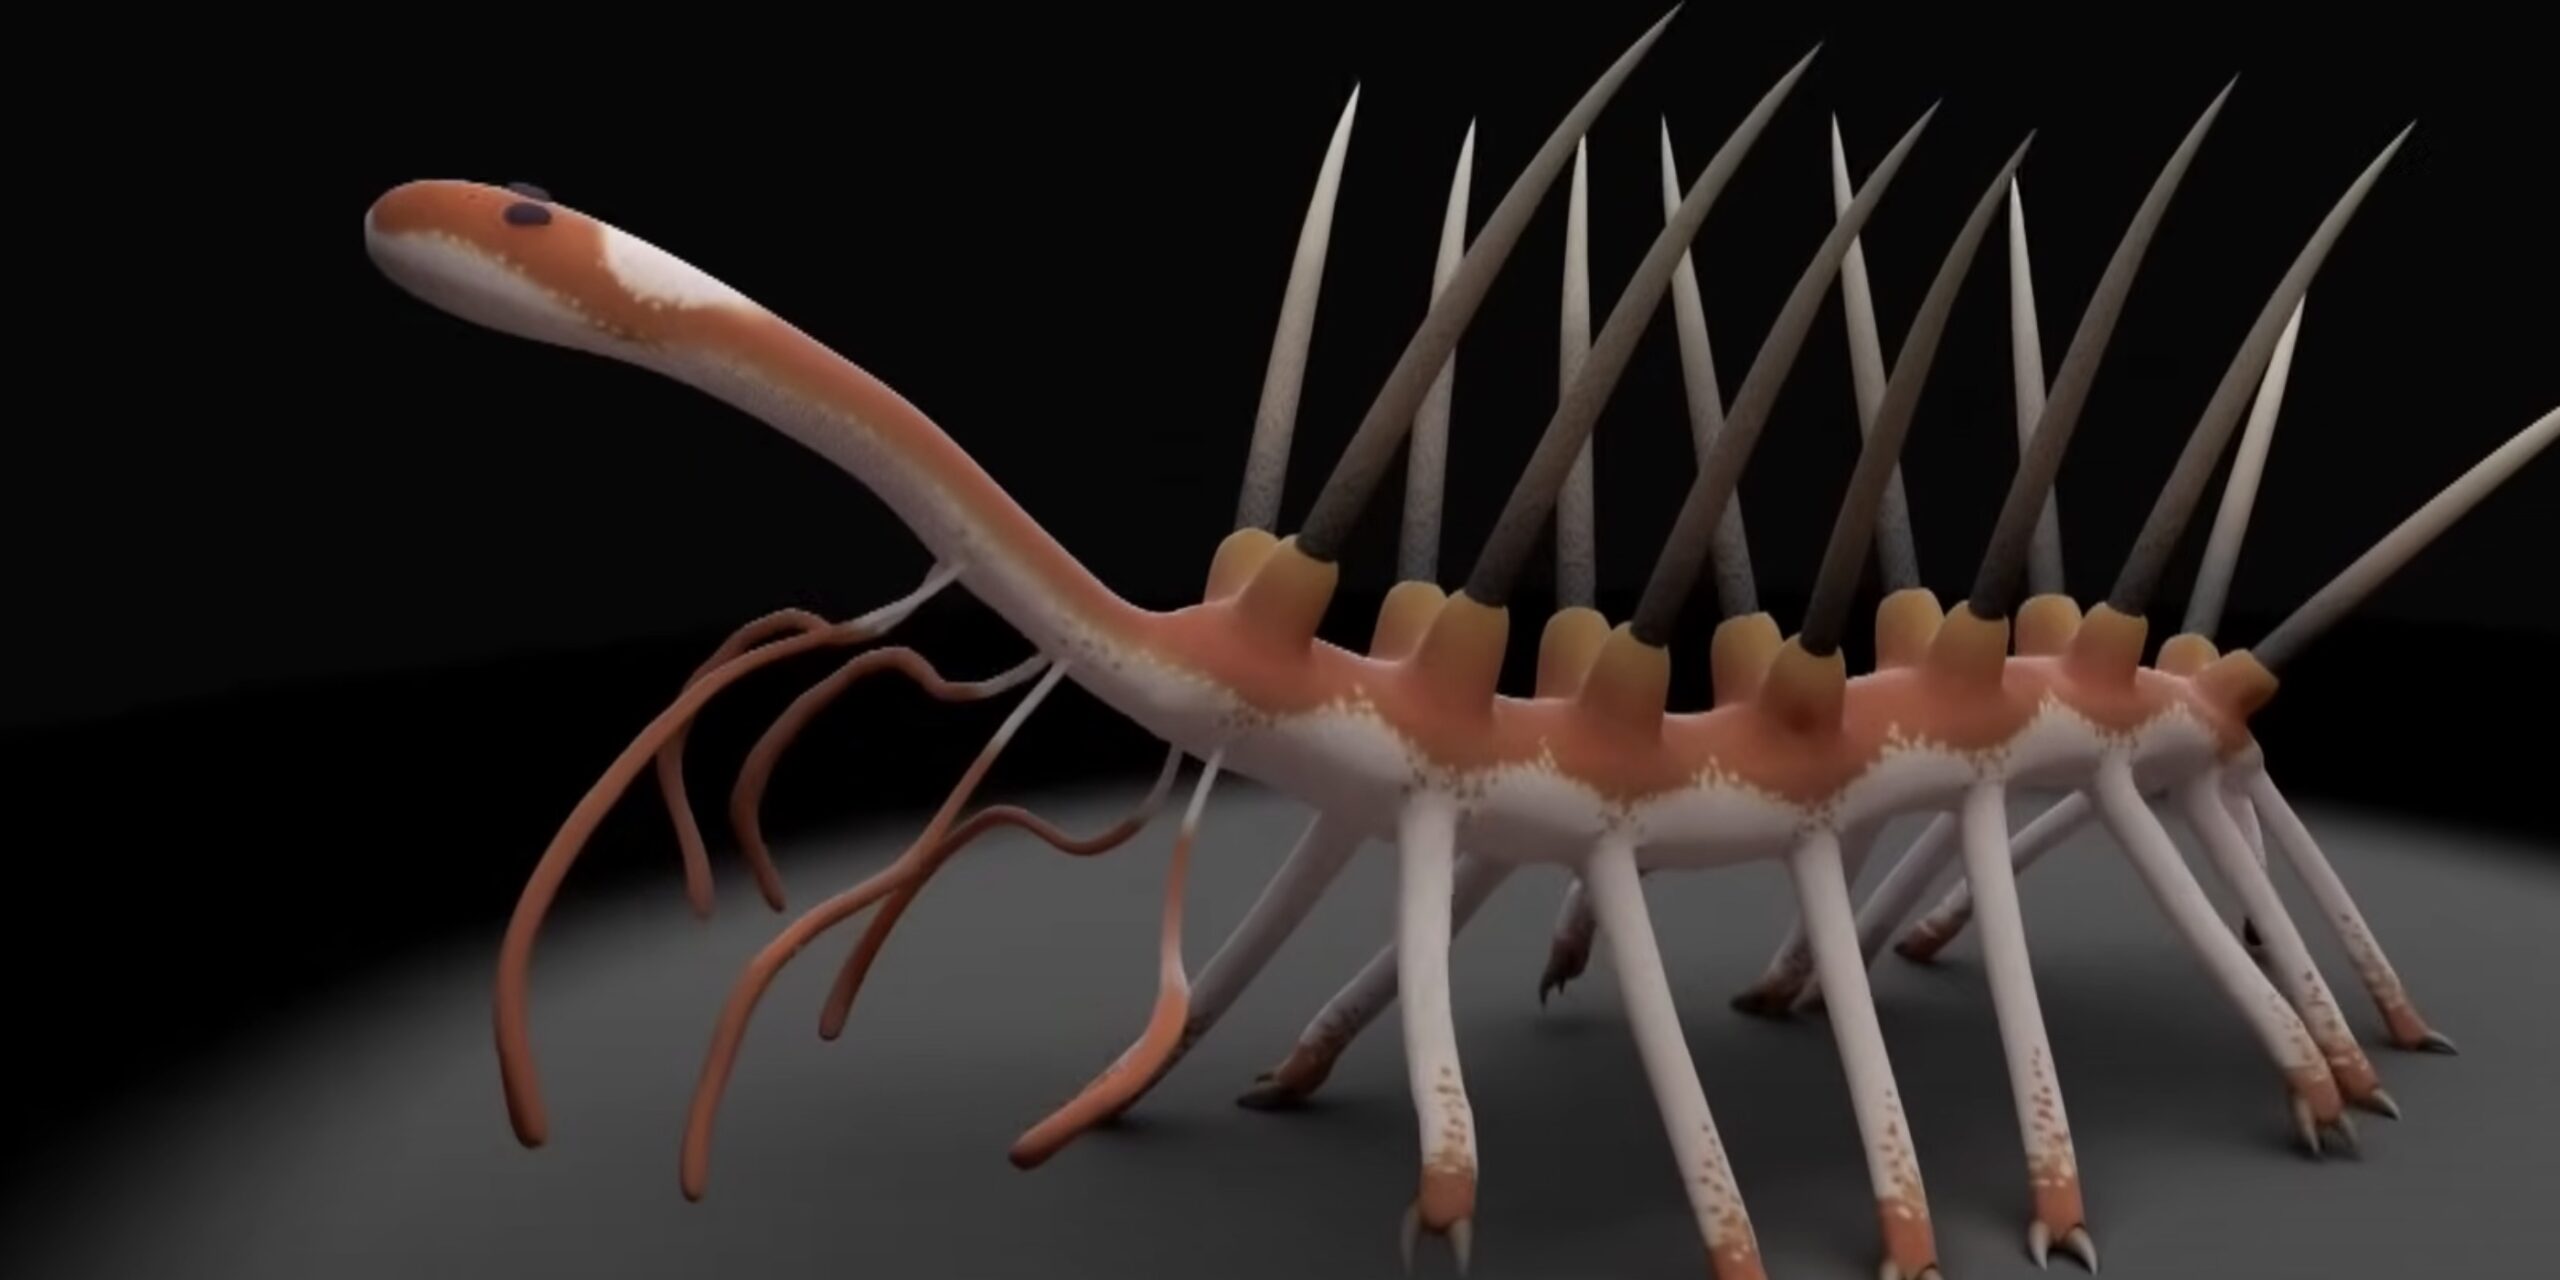 Does the Hallucigenia Worm Featured In Attack on Titan Exist In Reality? Explained